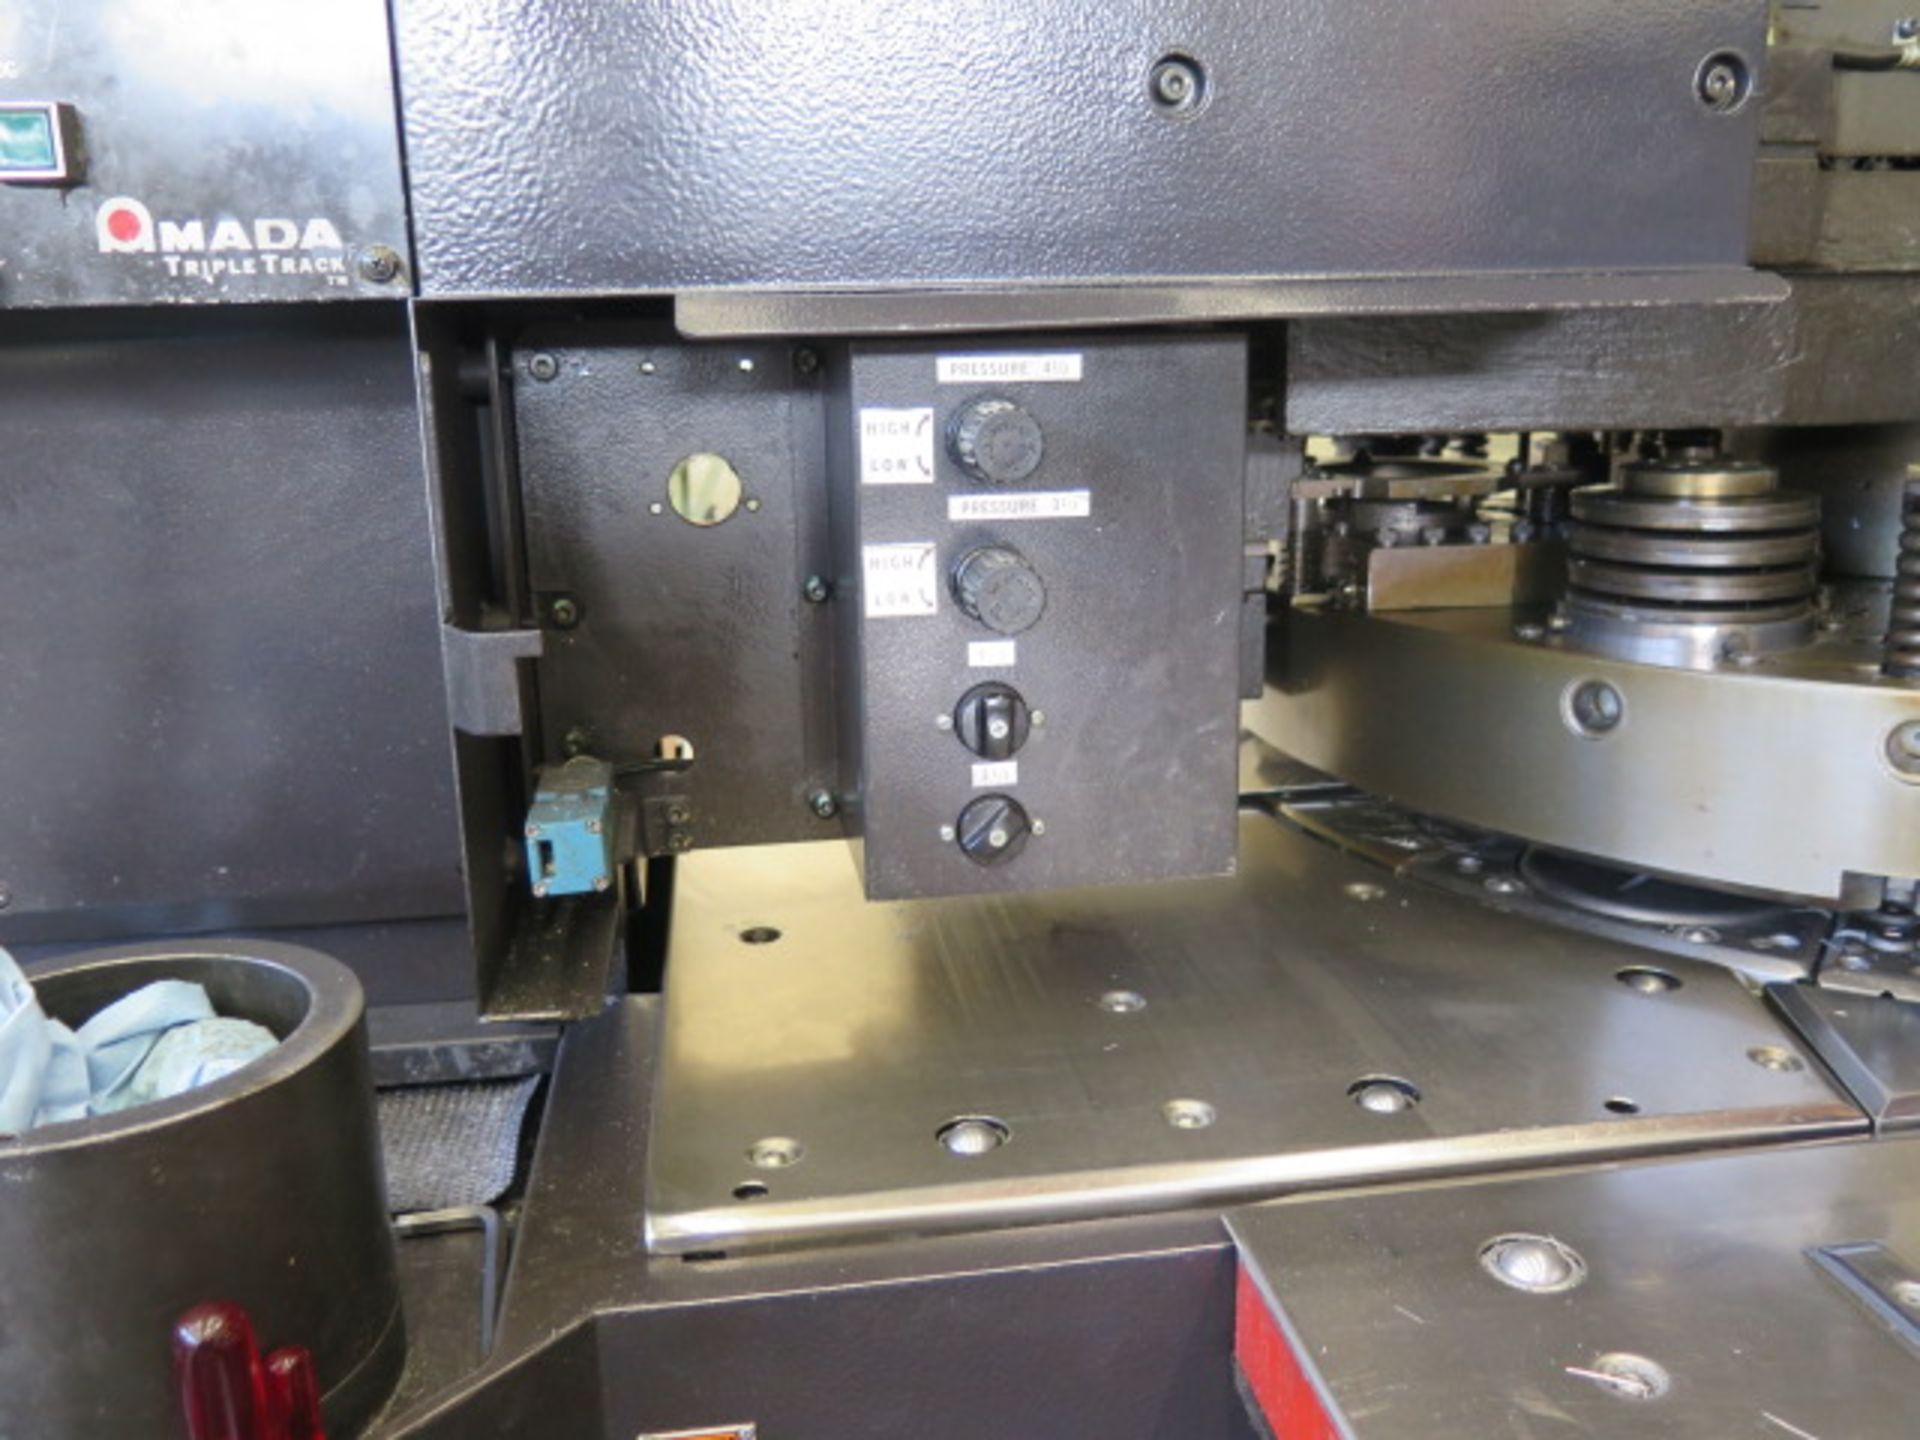 Amada VIPROS 357 30-Ton CNC Turret Punch Cell s/n 35710664 w/ 04P-C Controls, 58-Station, SOLD AS IS - Image 8 of 37